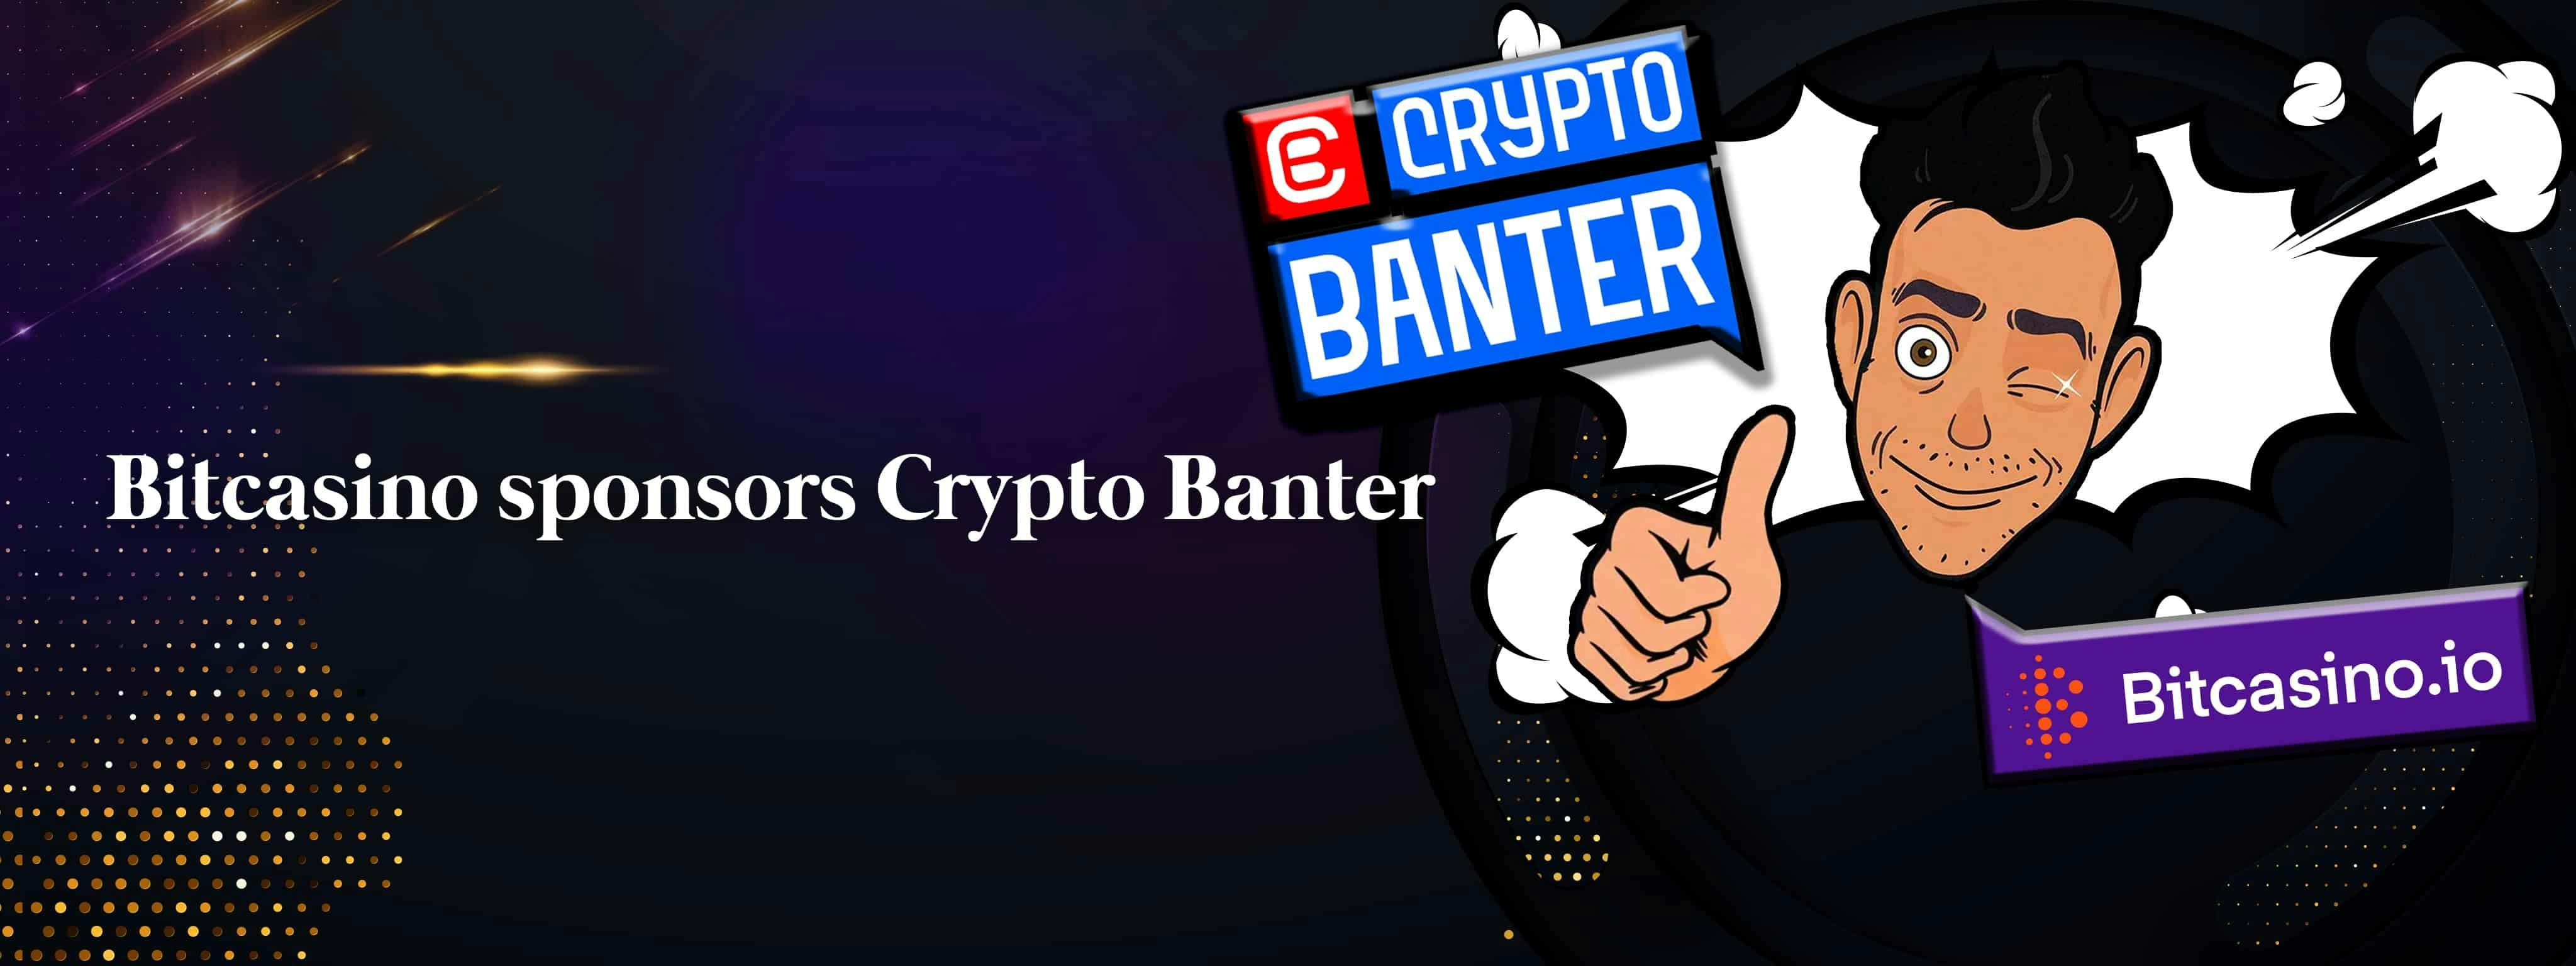 Join Bitcasino and Crypto Banter on an epic journey